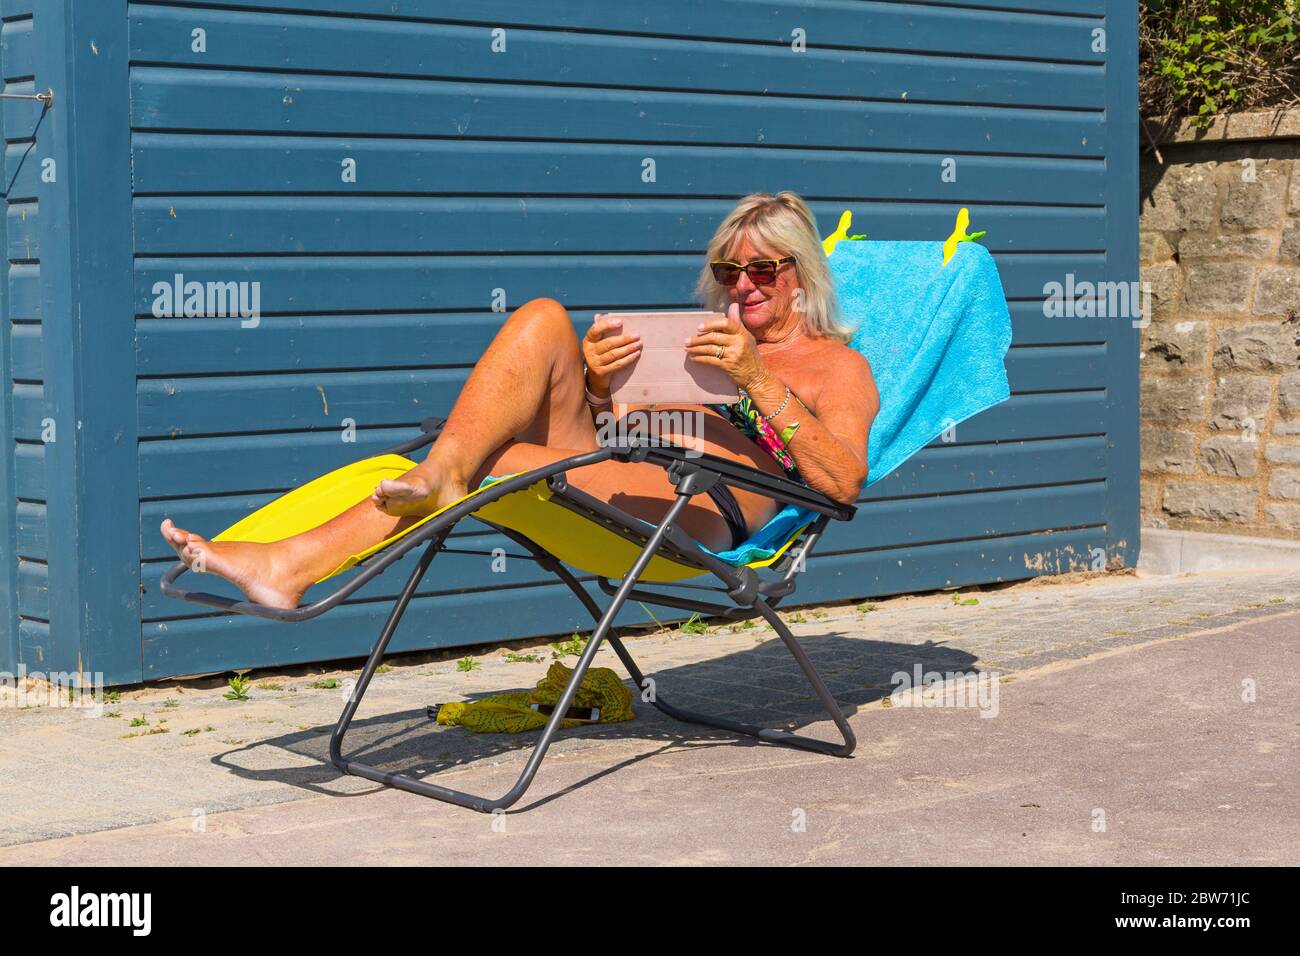 Bournemouth, Dorset UK. 30th May 2020. UK weather: hot sunny day at Bournemouth beaches as the glorious weather continues and temperatures rise with clear blue skies and unbroken sunshine. Sunseekers head to the seaside early to get a good spot and enjoy the sunshine, as the beaches are expected to get packed later. Joan soaks up the sun rays at her beach hut. Credit: Carolyn Jenkins/Alamy Live News Stock Photo